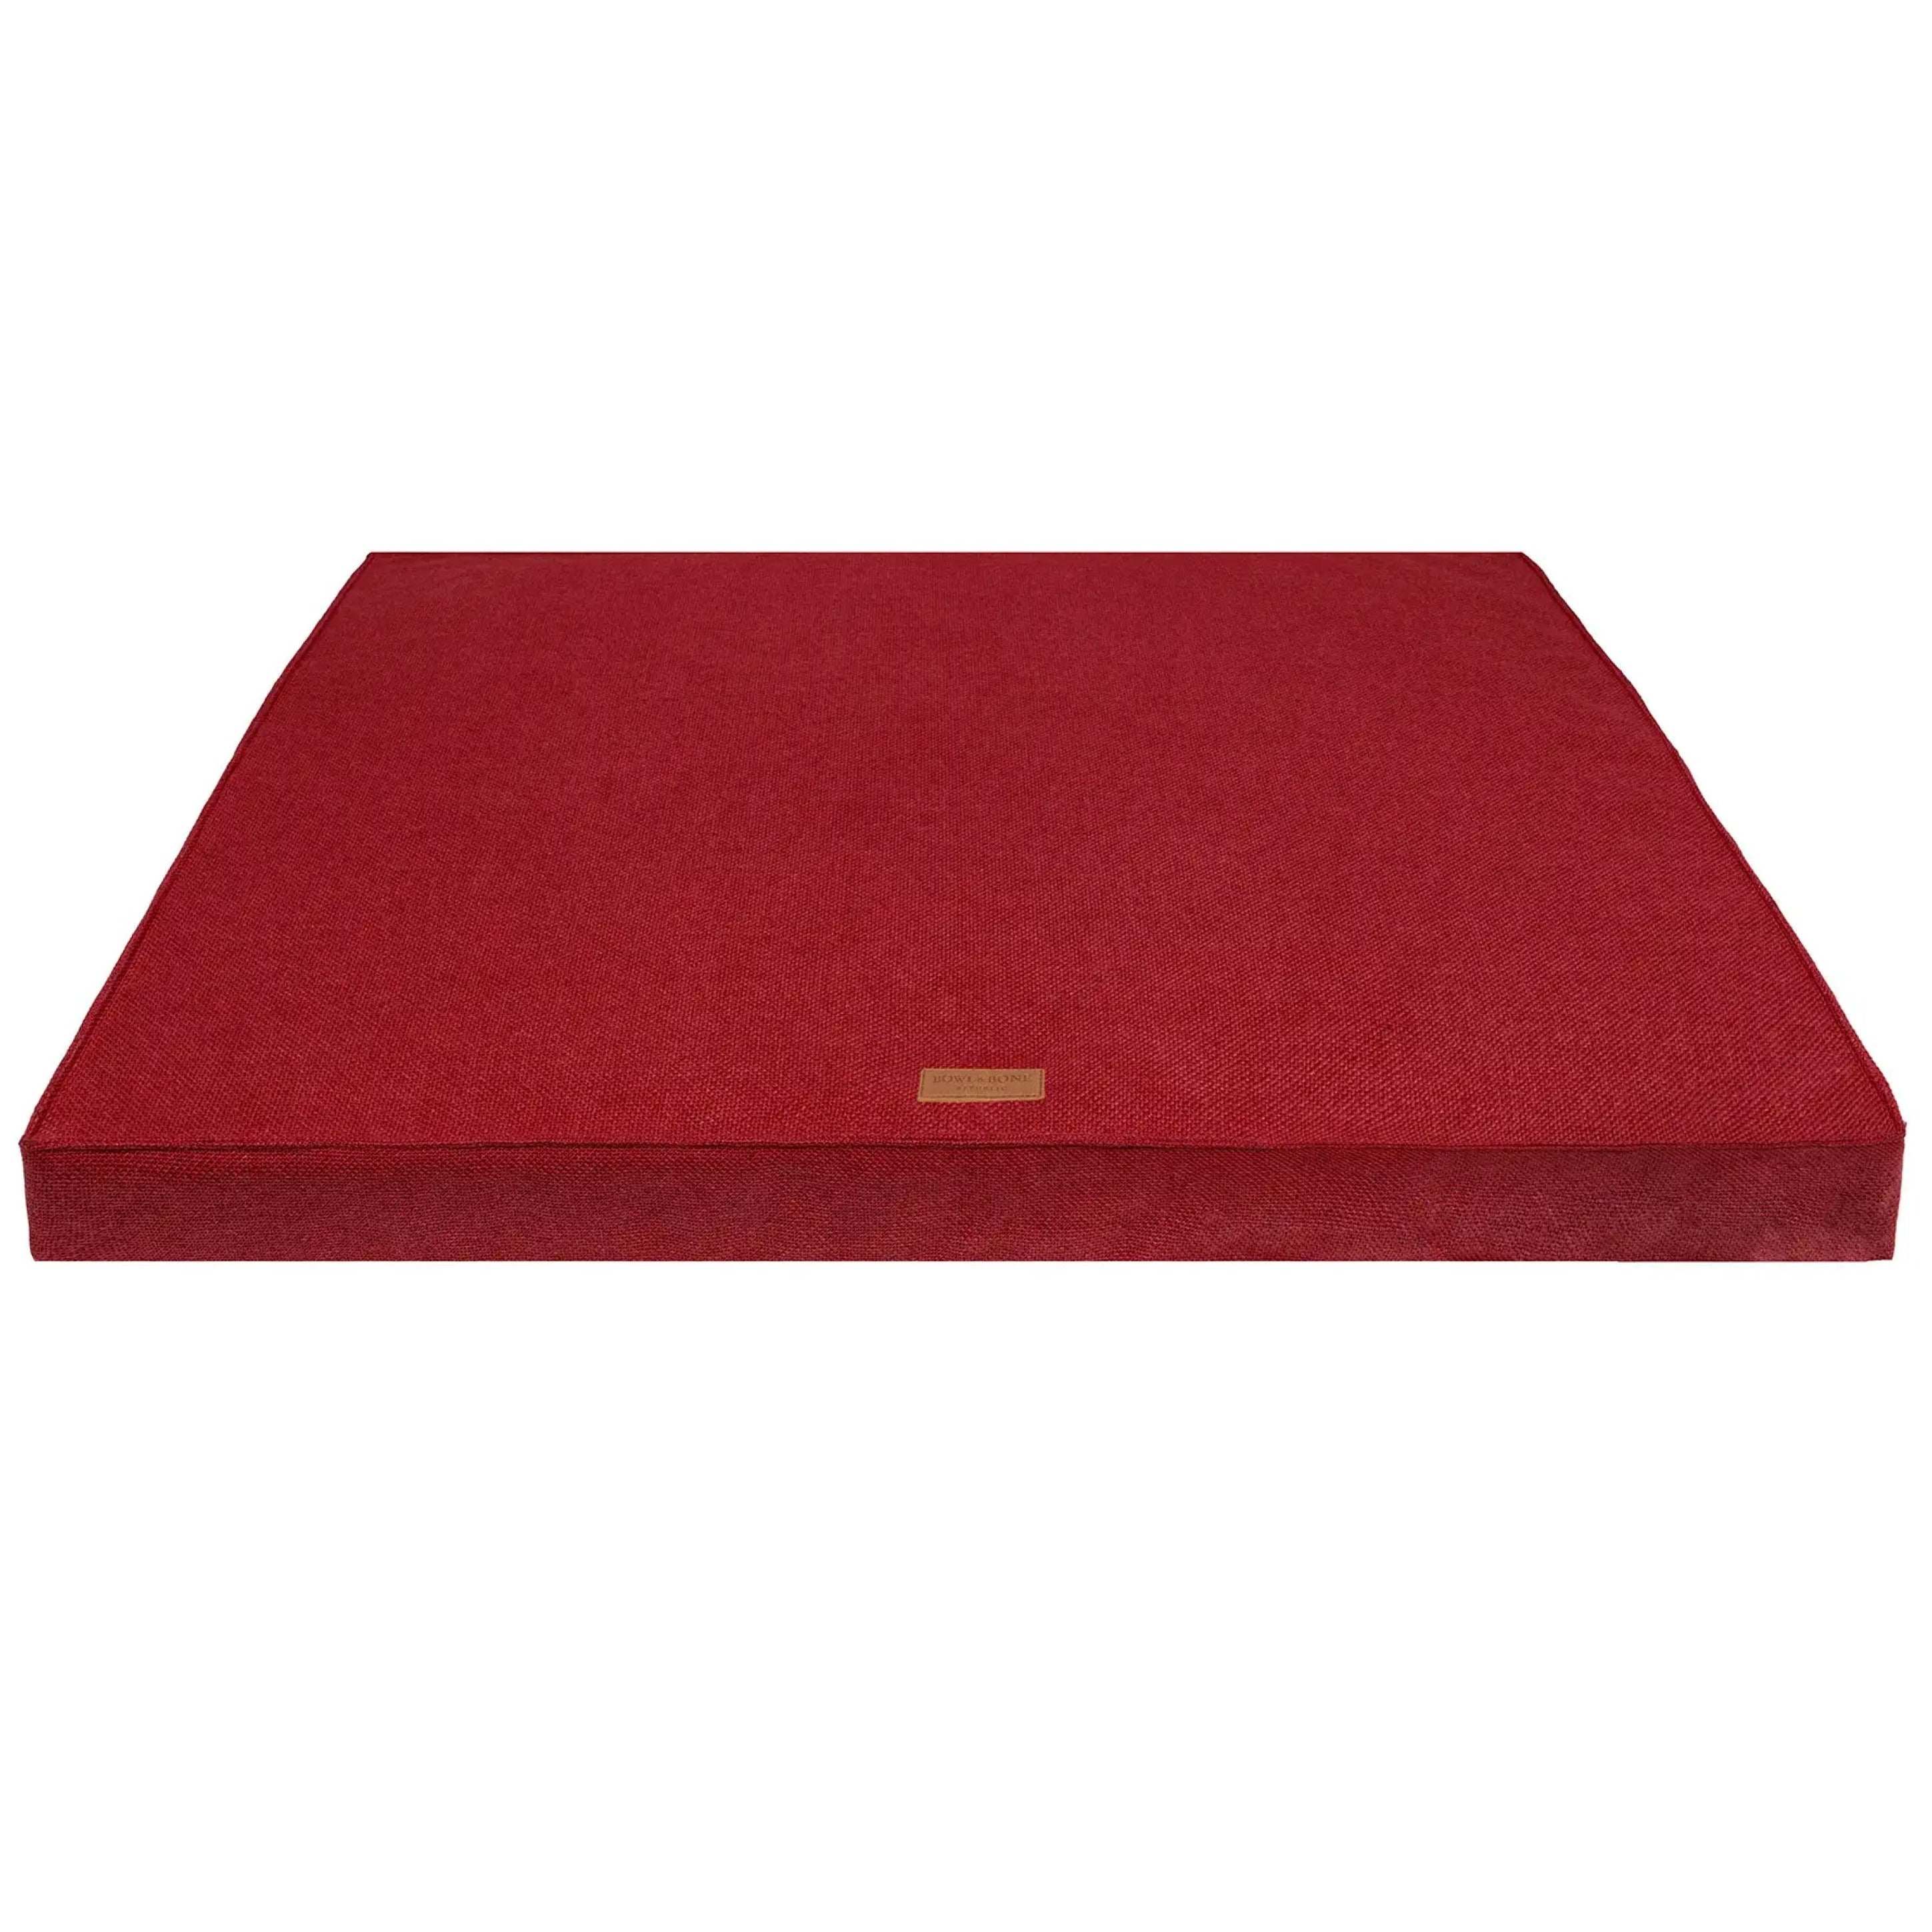 Orthopaedic Mattress Dog Bed Bliss Red from Bowl&Bone